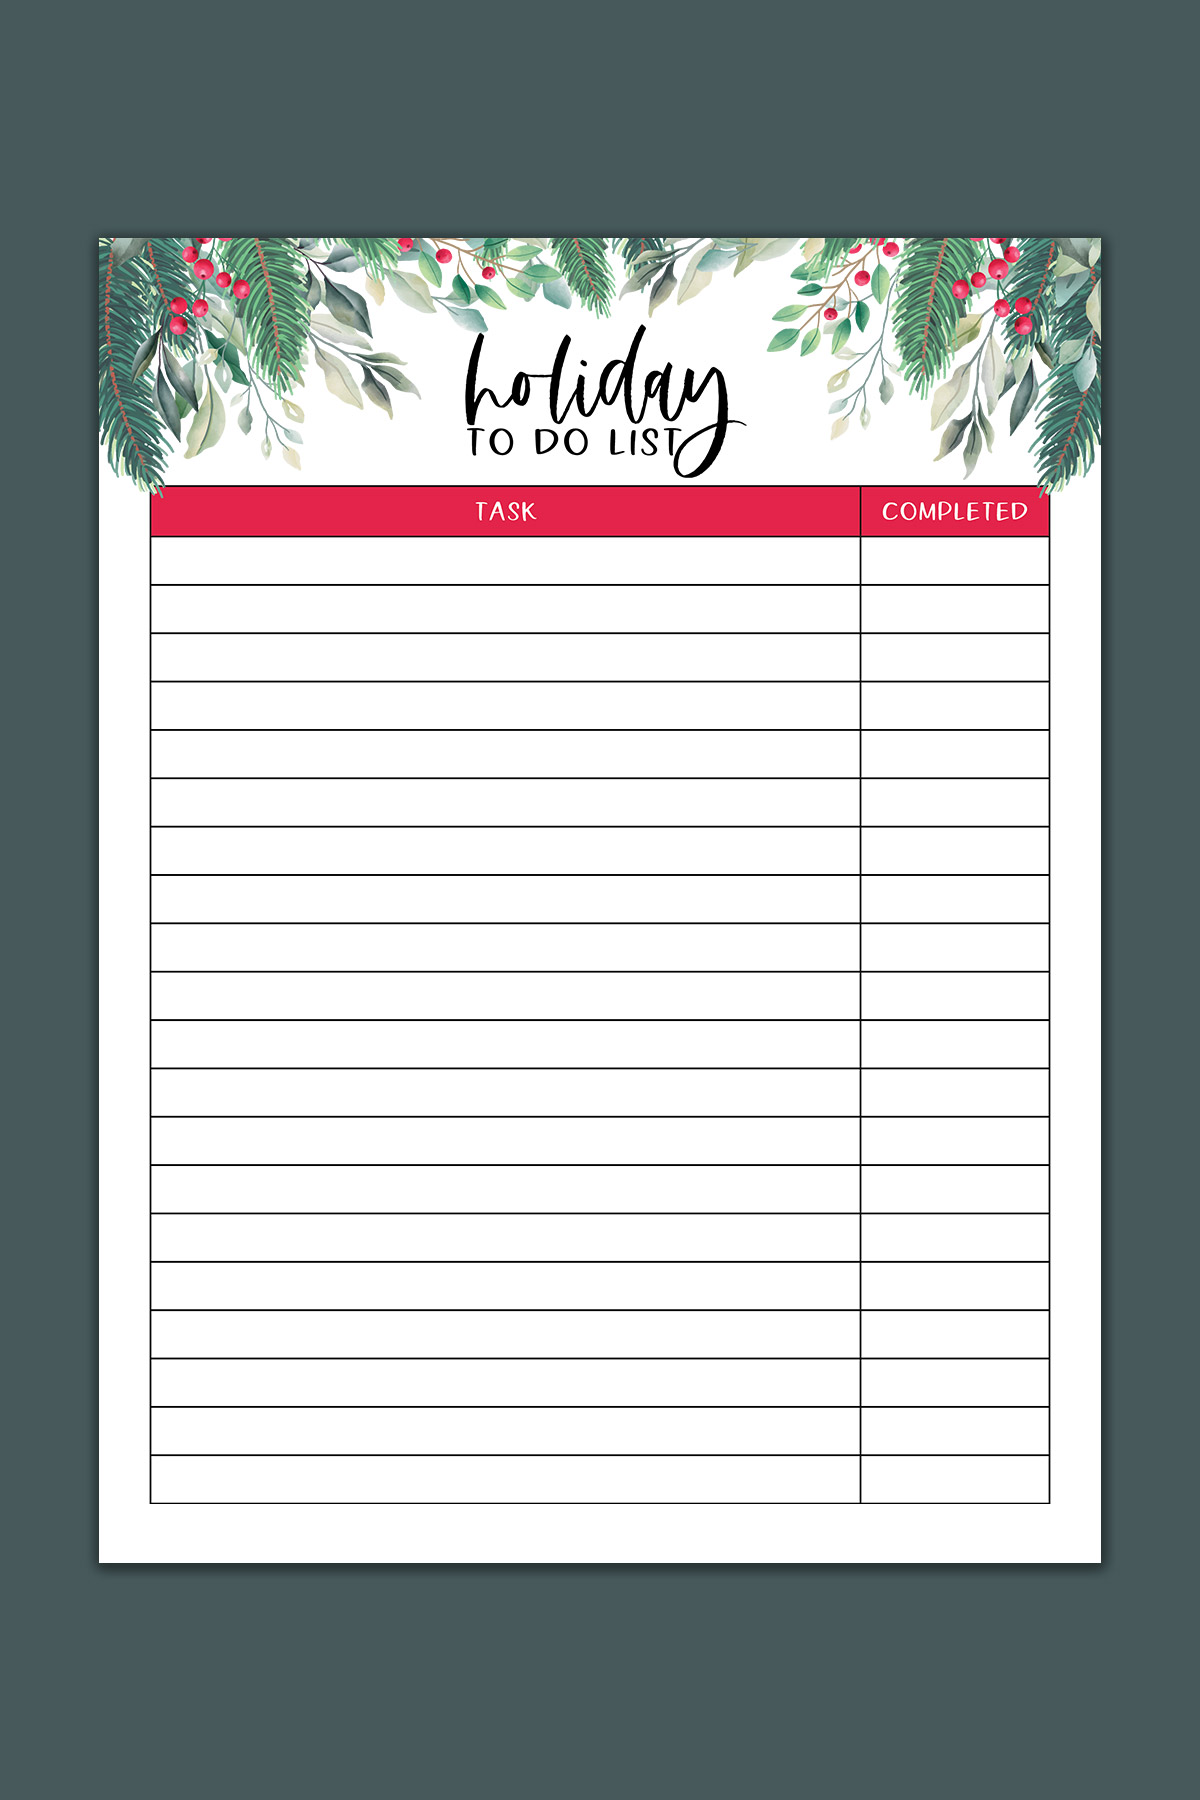 This image shows one of the pages that are part of the printable Christmas planner files you can get at the end of this blog post. This is the holiday to do list, version 2.